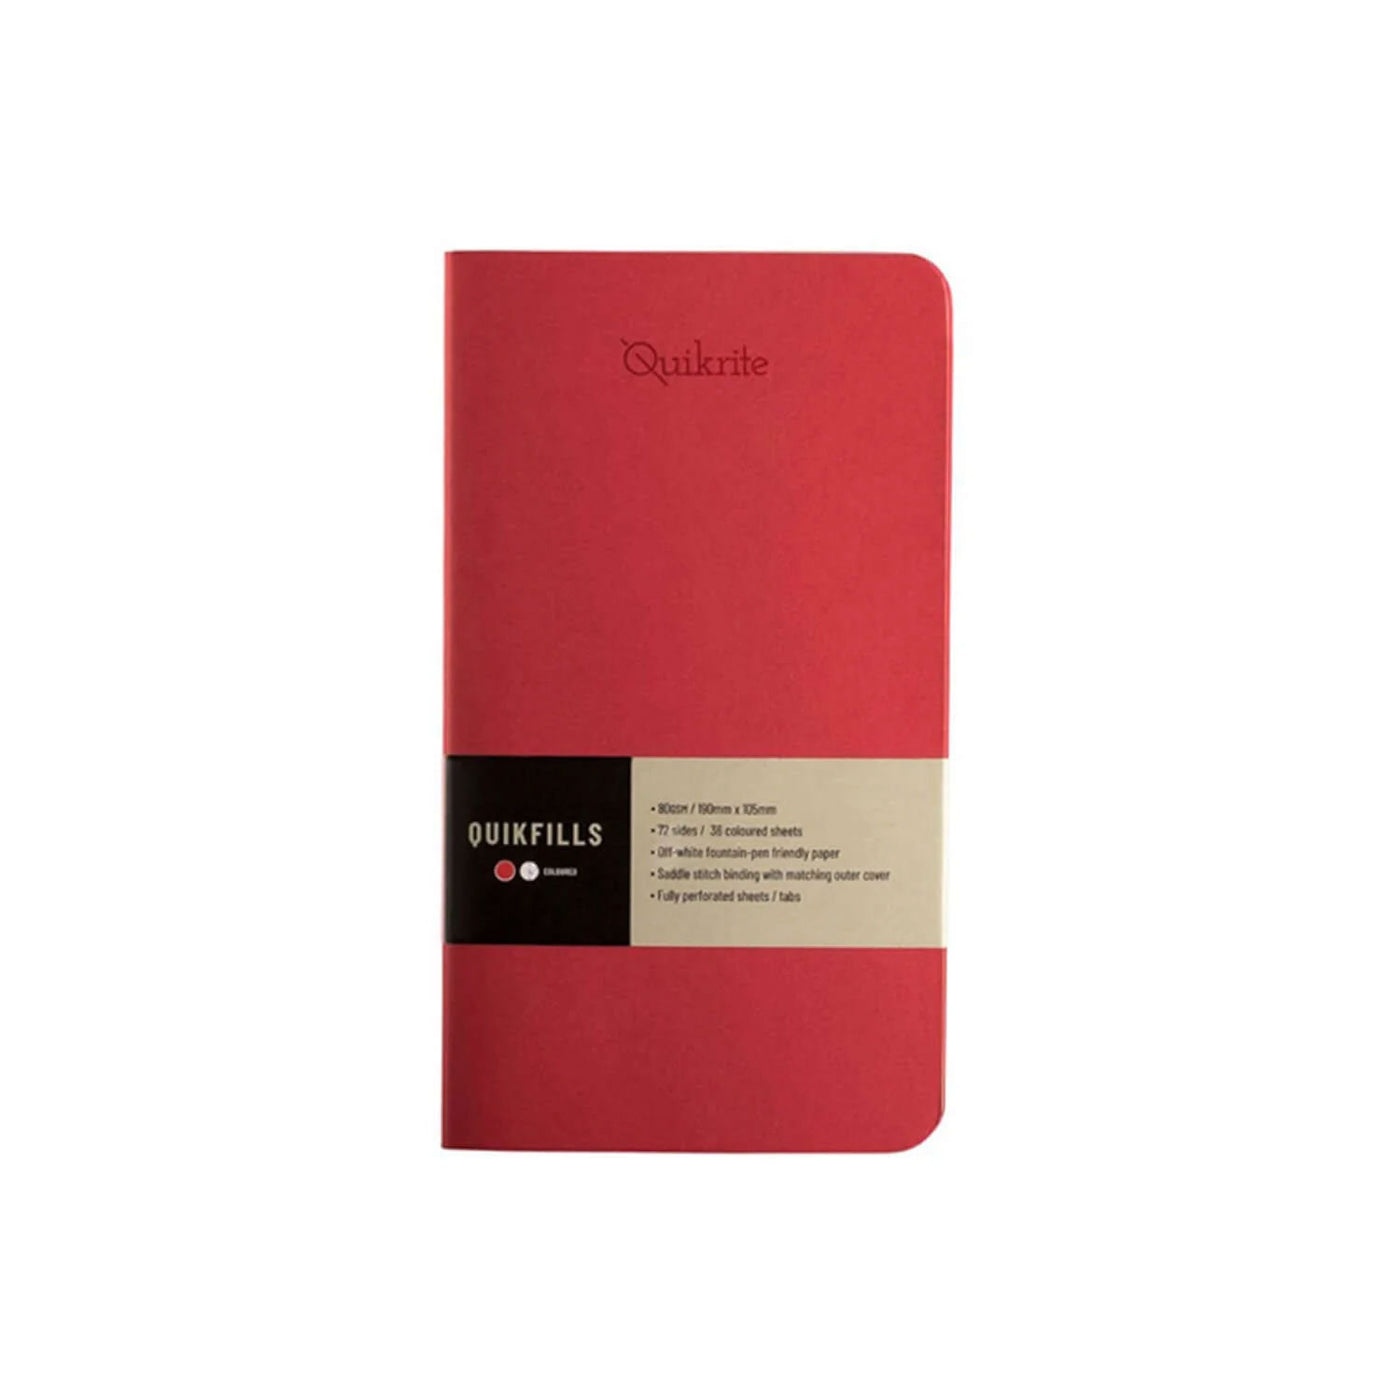 Pennline Quikfill Notebook Refill For Quikrite, Red - Set Of 2 1